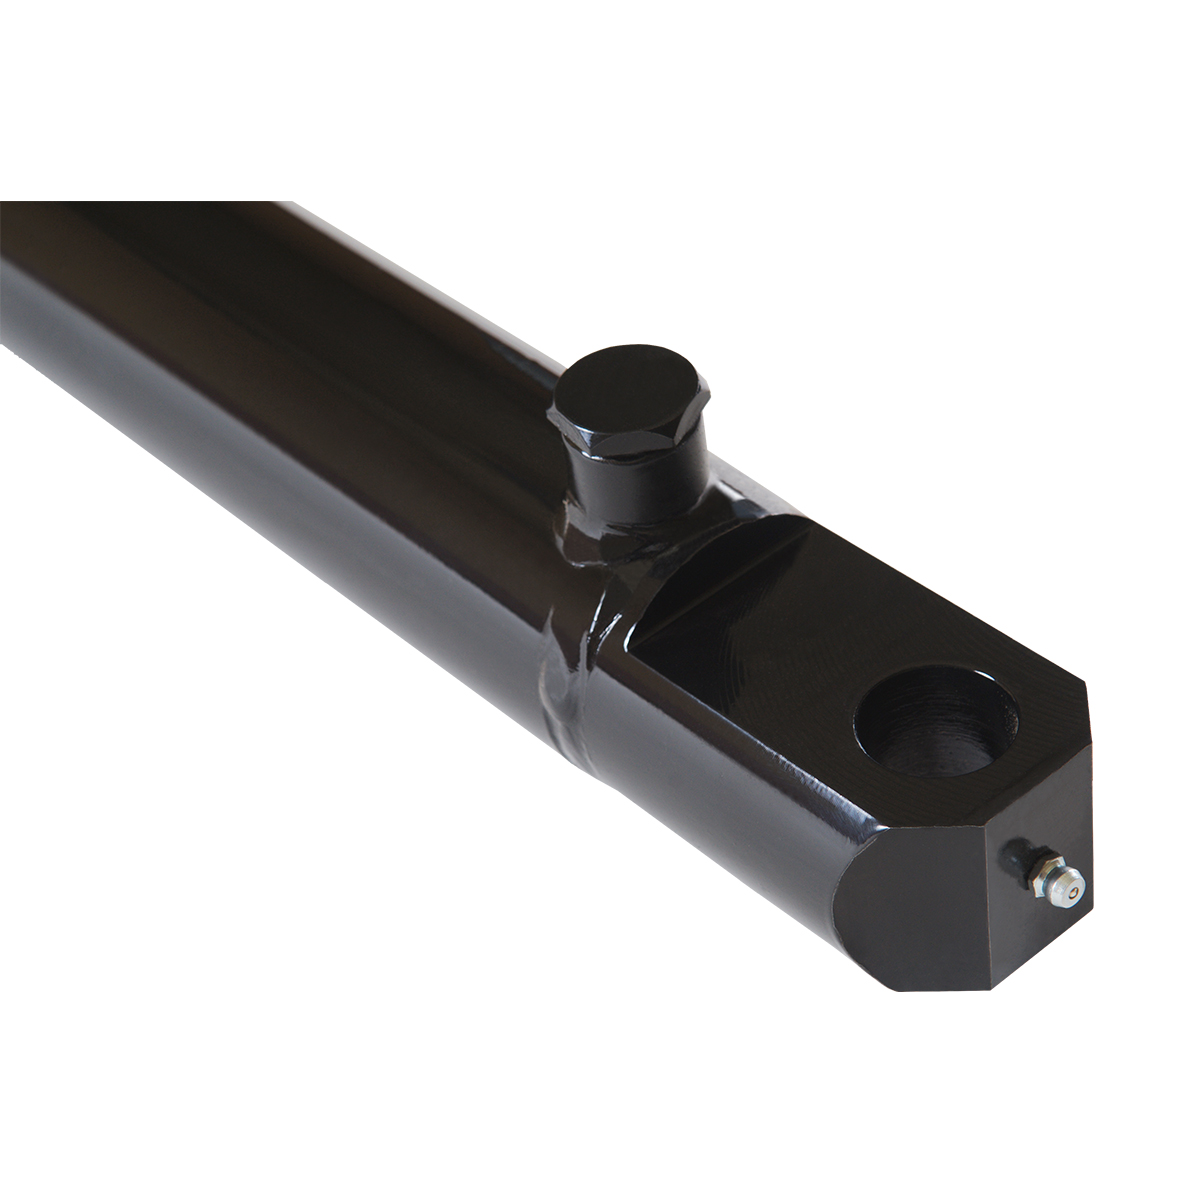 Ports are 180° w//Pins Clevis 6/" Stroke Hydraulic Welded Cylinder Details about  / 3/" Bore